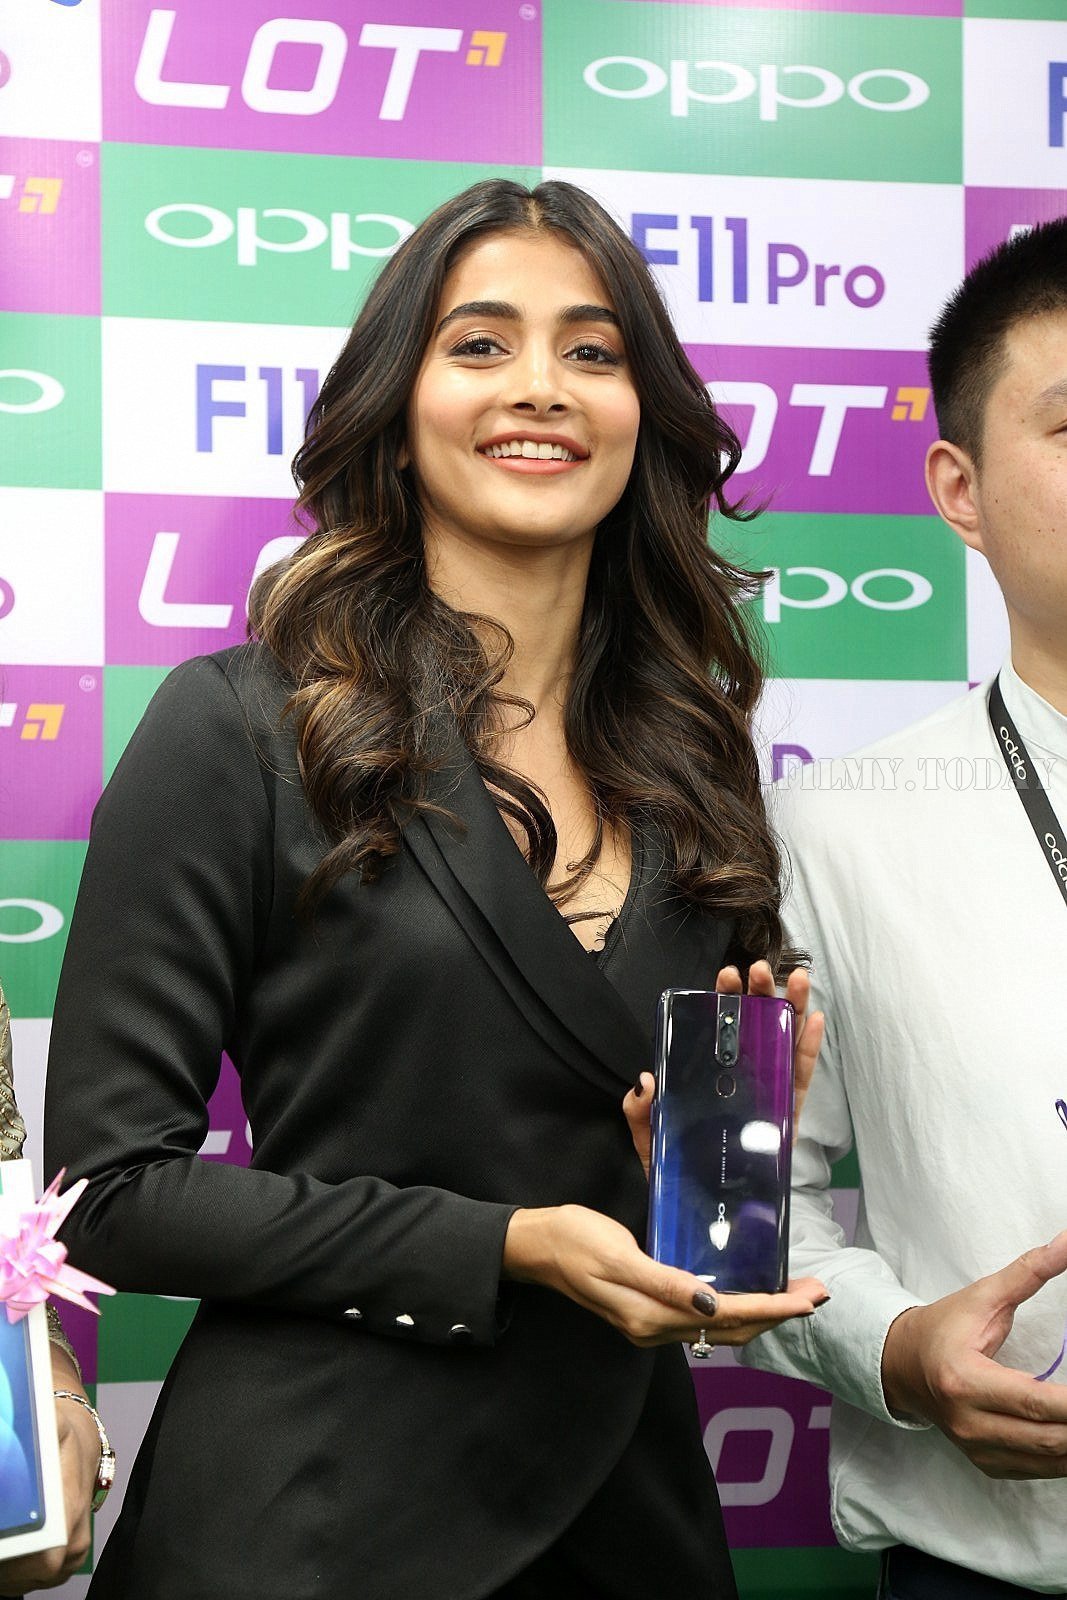 Photos: Pooja Hegde Launched Oppo F11 Pro Mobile At LOT Mobiles | Picture 1635915